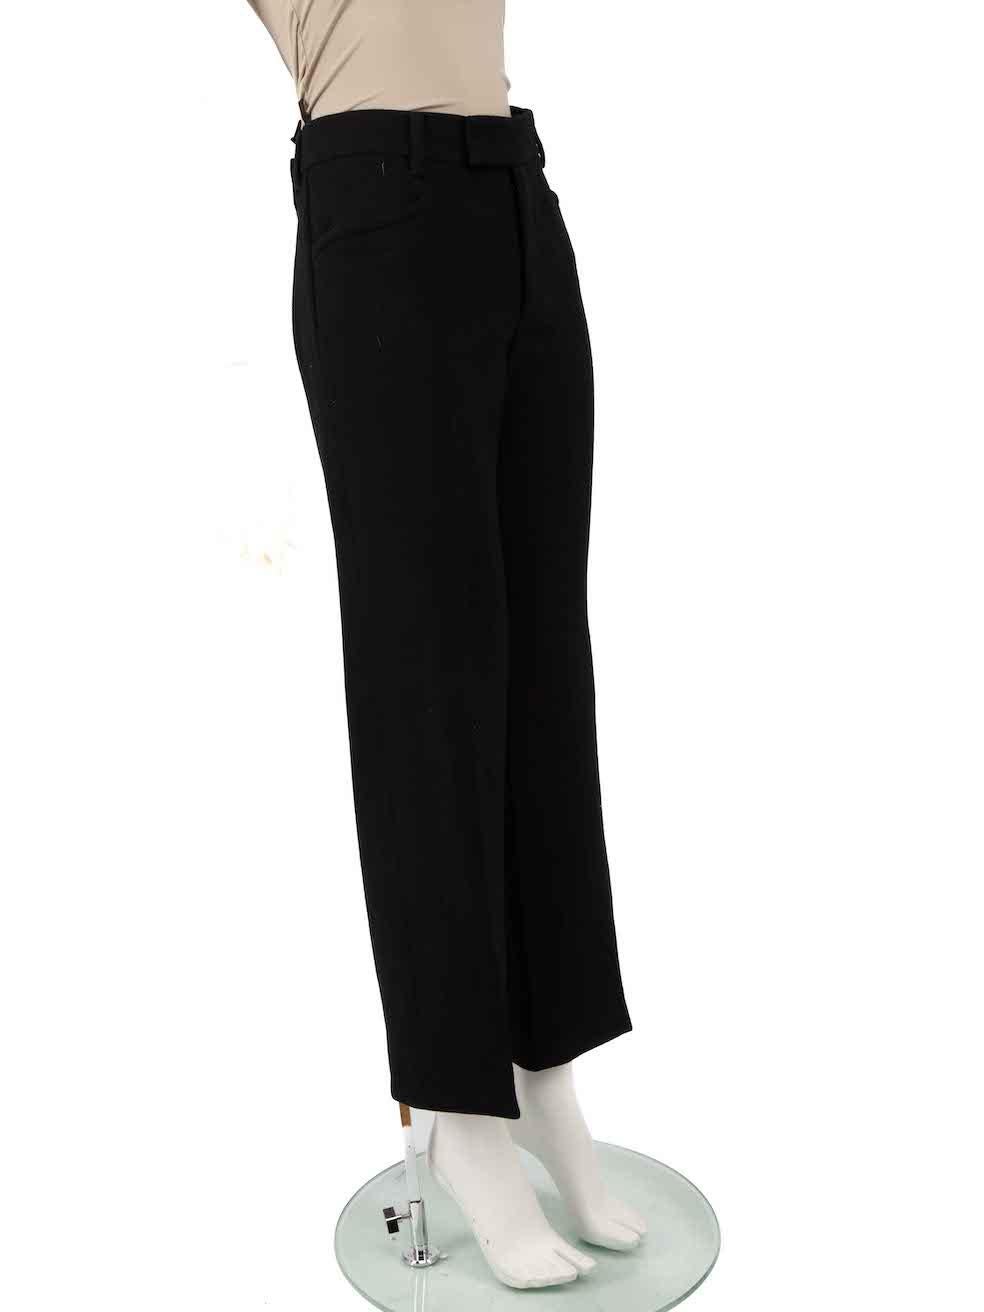 CONDITION is Very good. Hardly any visible wear to trousers is evident on this used Miu Miu designer resale item.
 
 
 
 Details
 
 
 Black
 
 Wool
 
 Trousers
 
 Straight fit
 
 Mid rise
 
 2x Side pockets
 
 1x Back pocket
 
 Fly zip, hook and